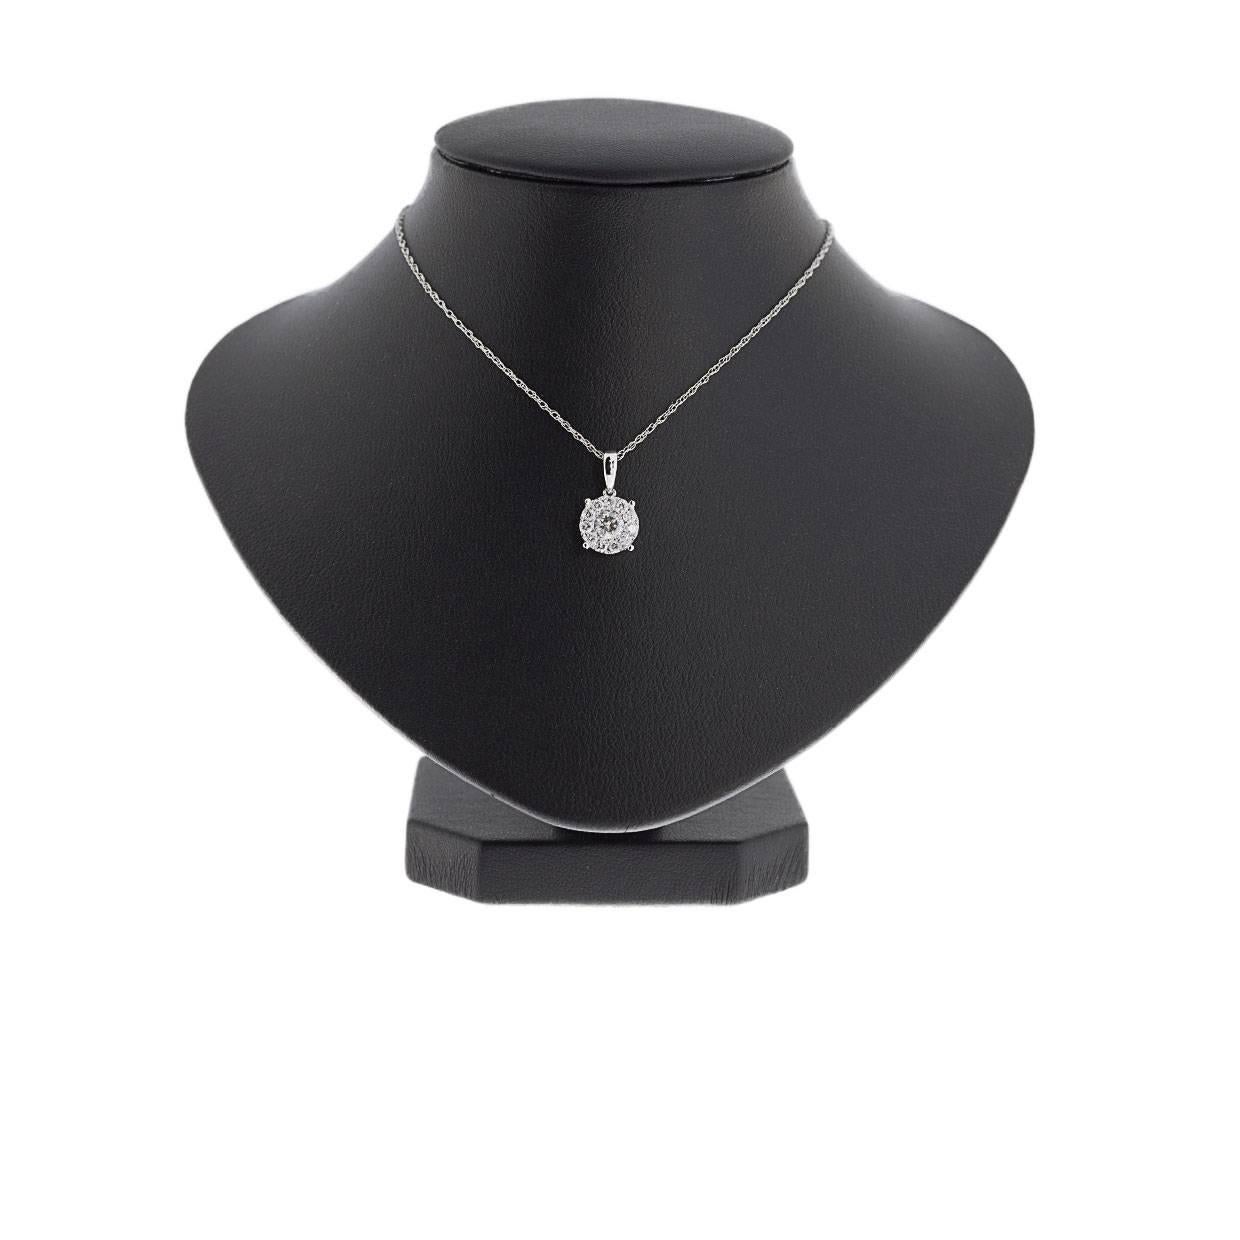 Simple yet elegant & beautiful would be the best way to describe this stunning necklace! This timeless pendant gives a really big look, featuring sparkly round brilliant cut diamonds in a lovely halo pendant. The diamonds have a combined total